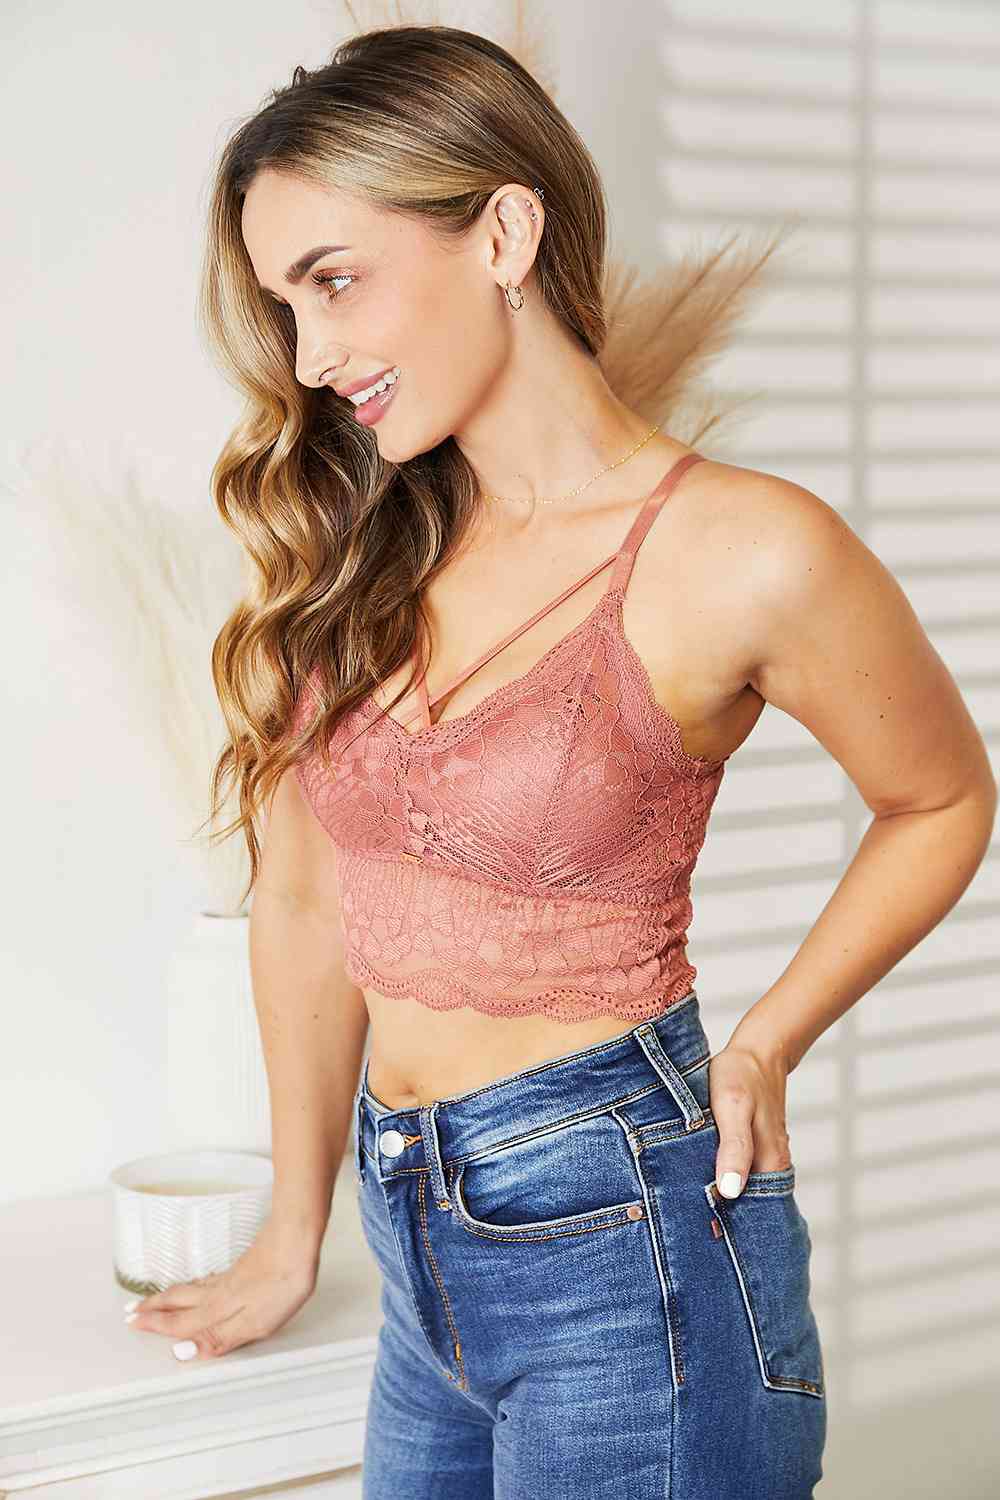 Crisscross Front Lace Bralette - Kawaii Stop - Allure, Bold Fashion, Captivating, Confidence, Empowerment, Enhance Your Beauty, Everyday Elegance, Intricate Lace, JadyK, Lace Bralette, Light Support, Make a Statement, Provocative Detailing, Sensual Fashion, Ship from USA, Standalone Statement, Sultry and Stylish Look, Sultry Style